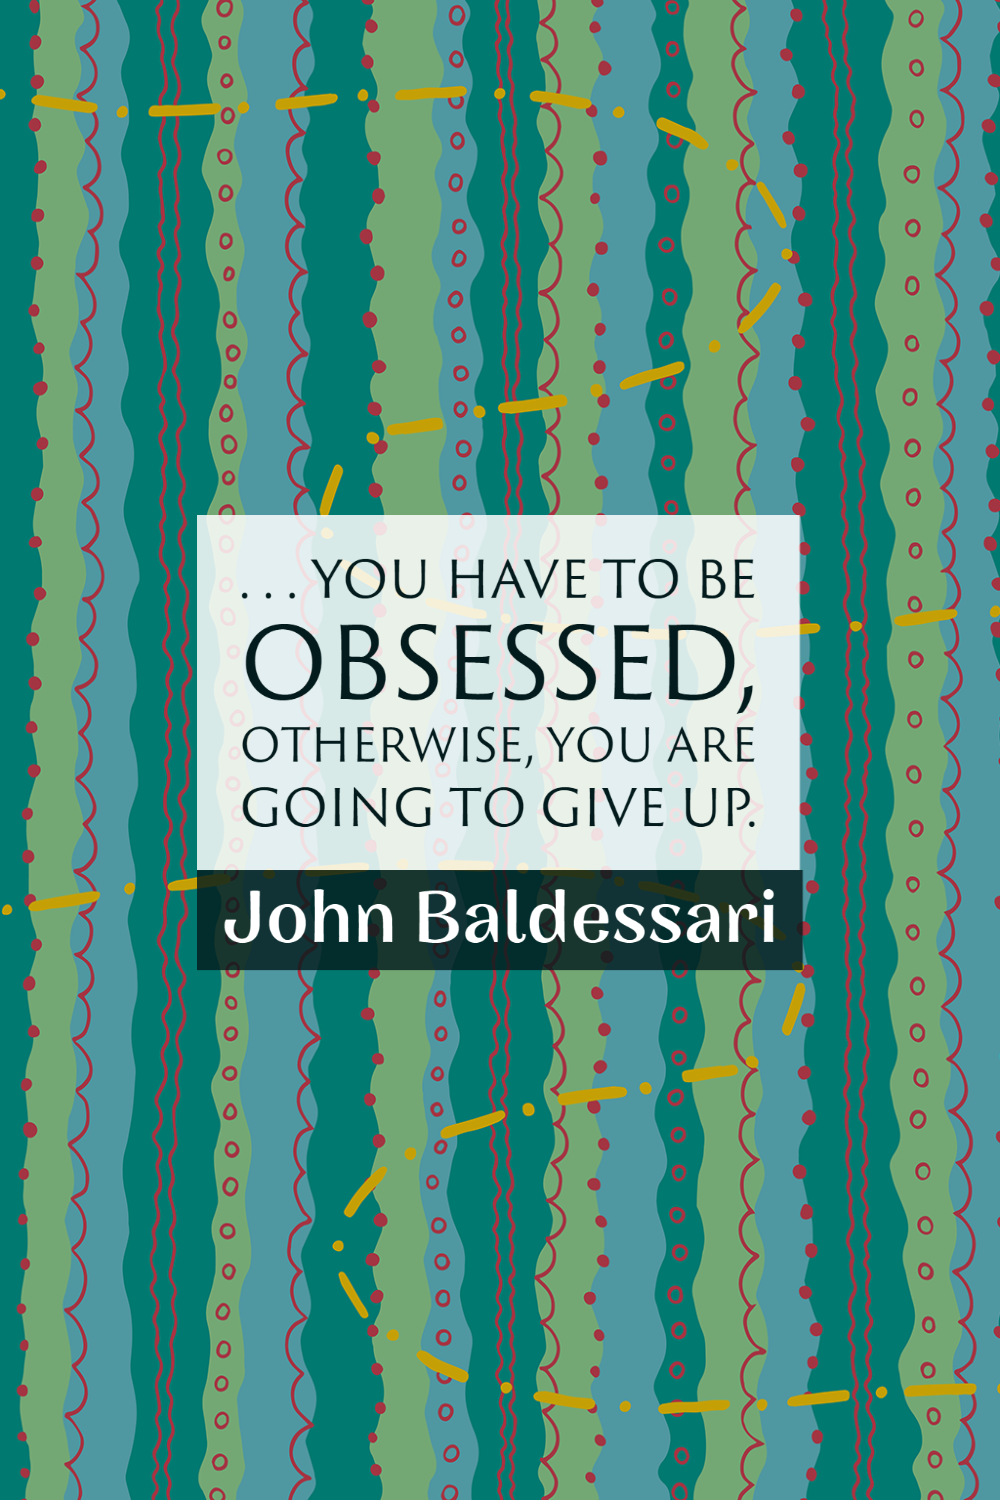 "You have to be obsessed, otherwise, you are going to give up." ~John Baldessari